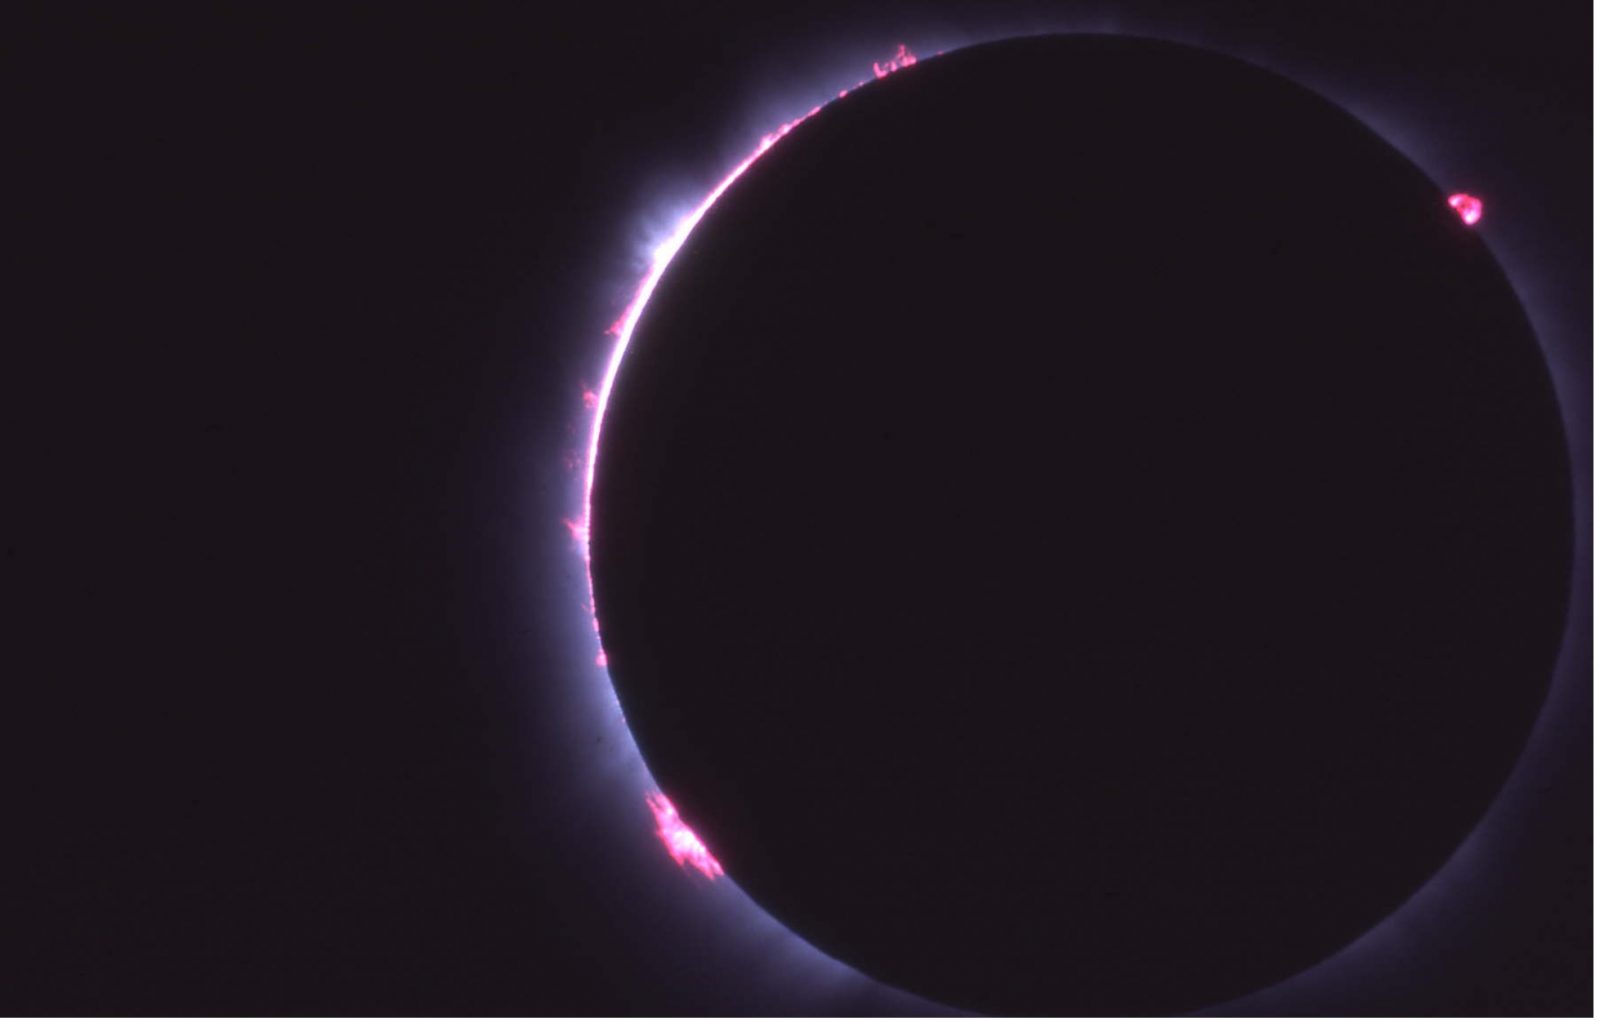 A solar eclipse: the moon is blocking most of the sun. Only a small portion of the sun, glowing pink and purple, can be seen behind the dark shadow of the moon.